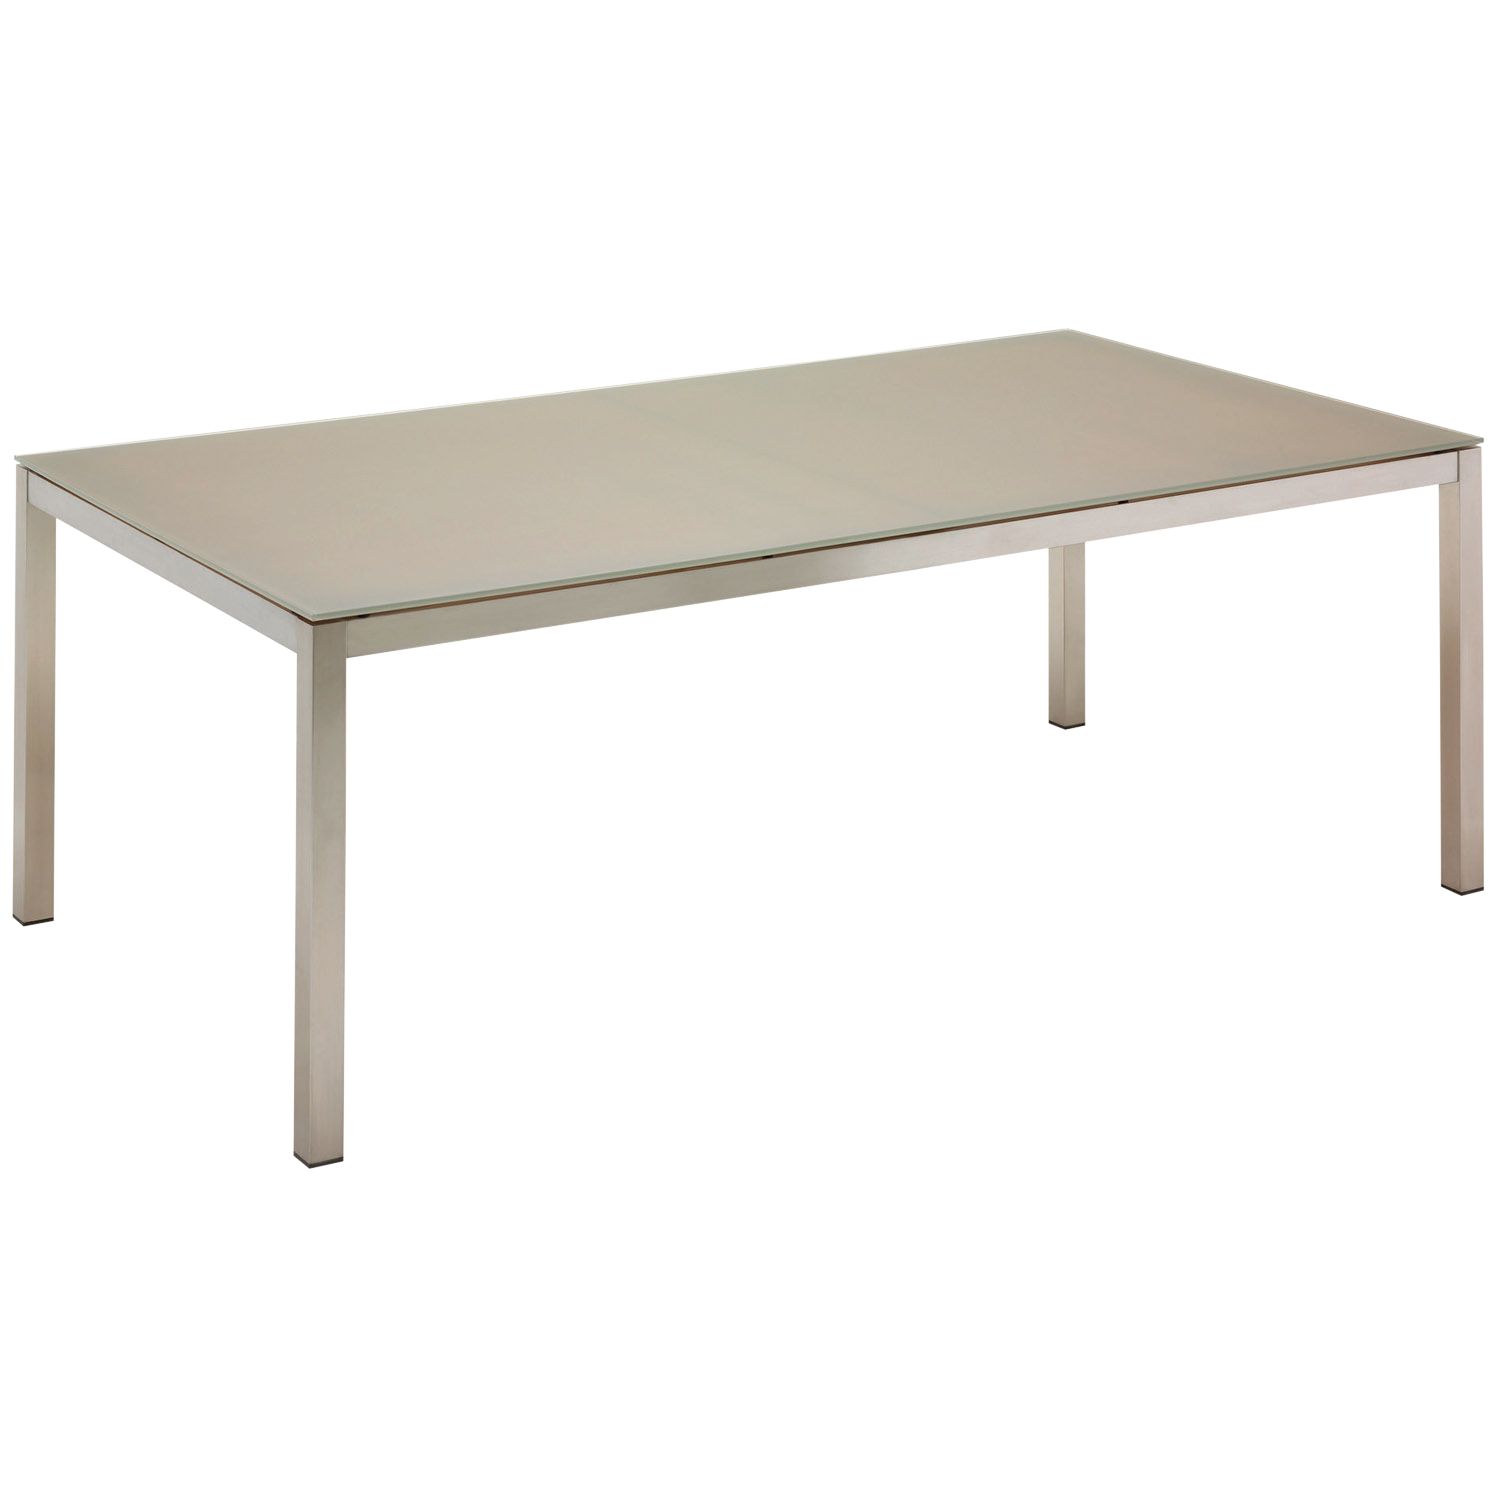 Gloster Kore Rectangular 8 Seater Outdoor Dining Table, Taupe Glass, width 206cm